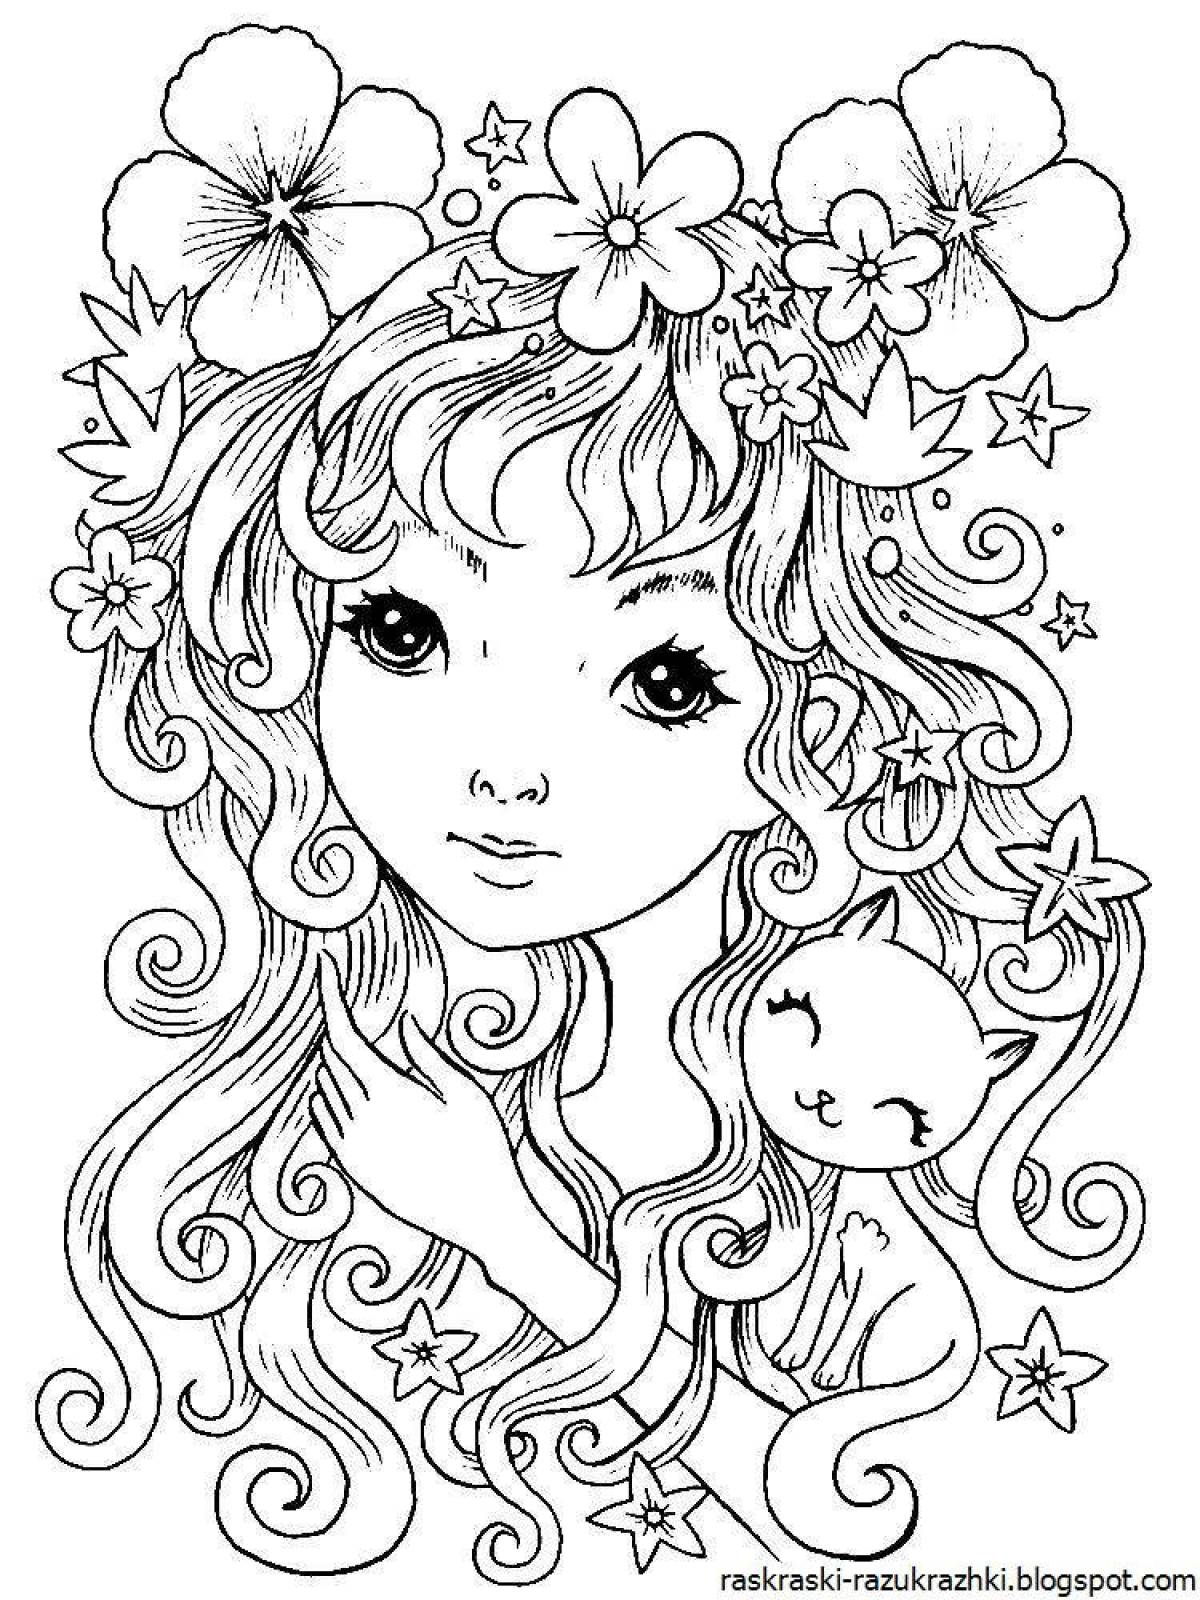 Glorious coloring book for girls 7-8 years old